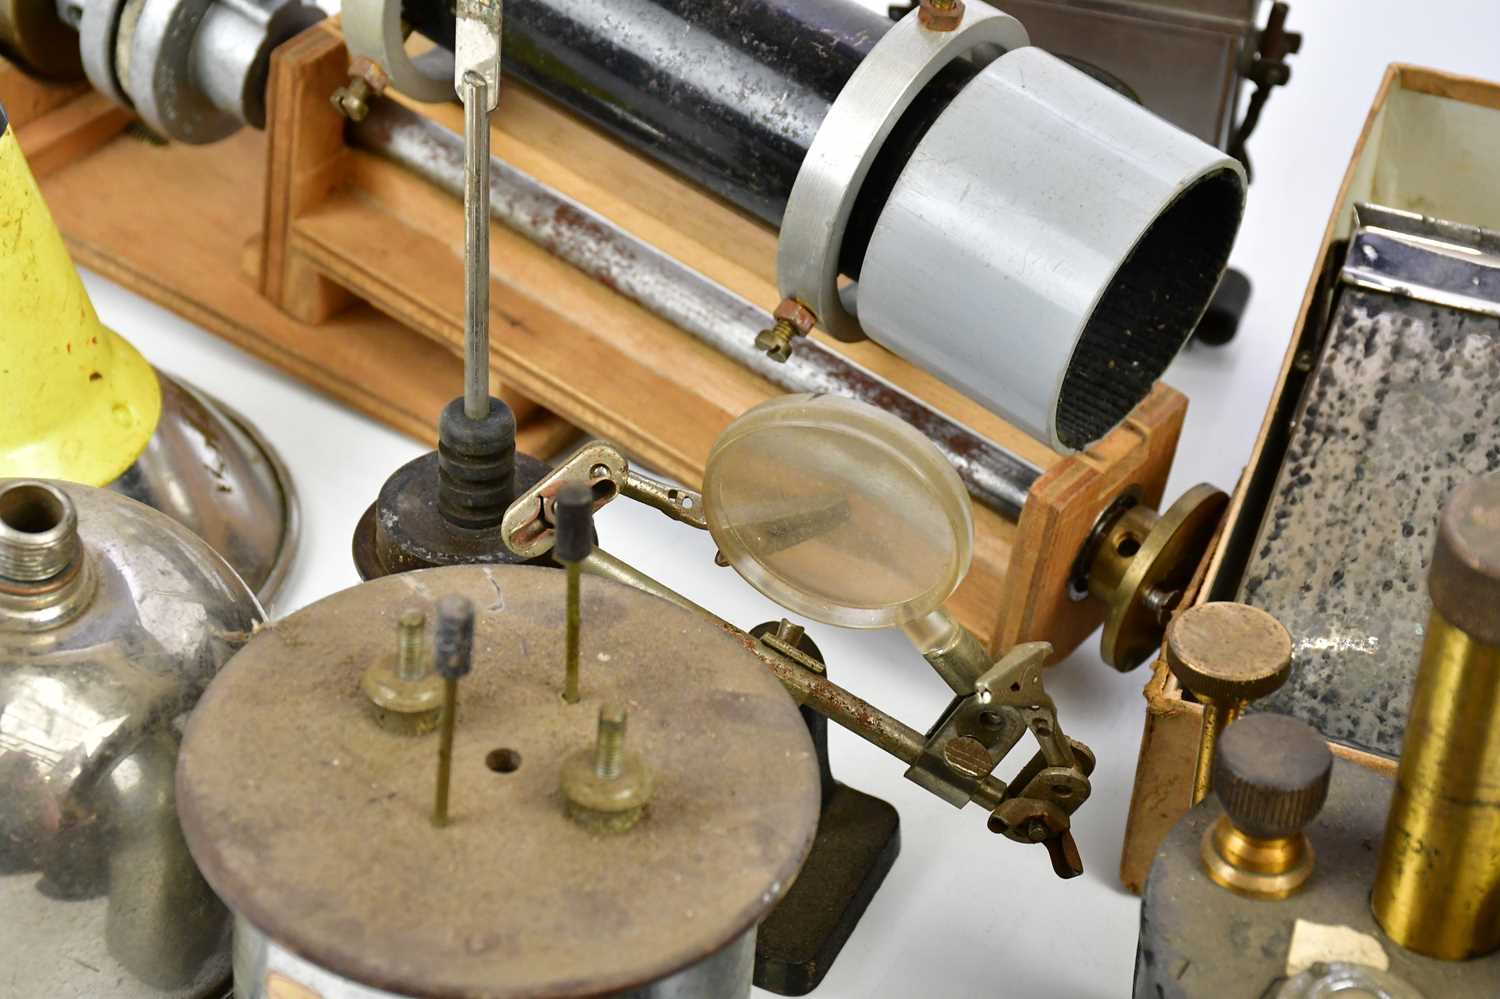 A Zenith Electric Co variable transformer, with an Endecotts Ltd laboratory test sieve set, a - Image 5 of 6